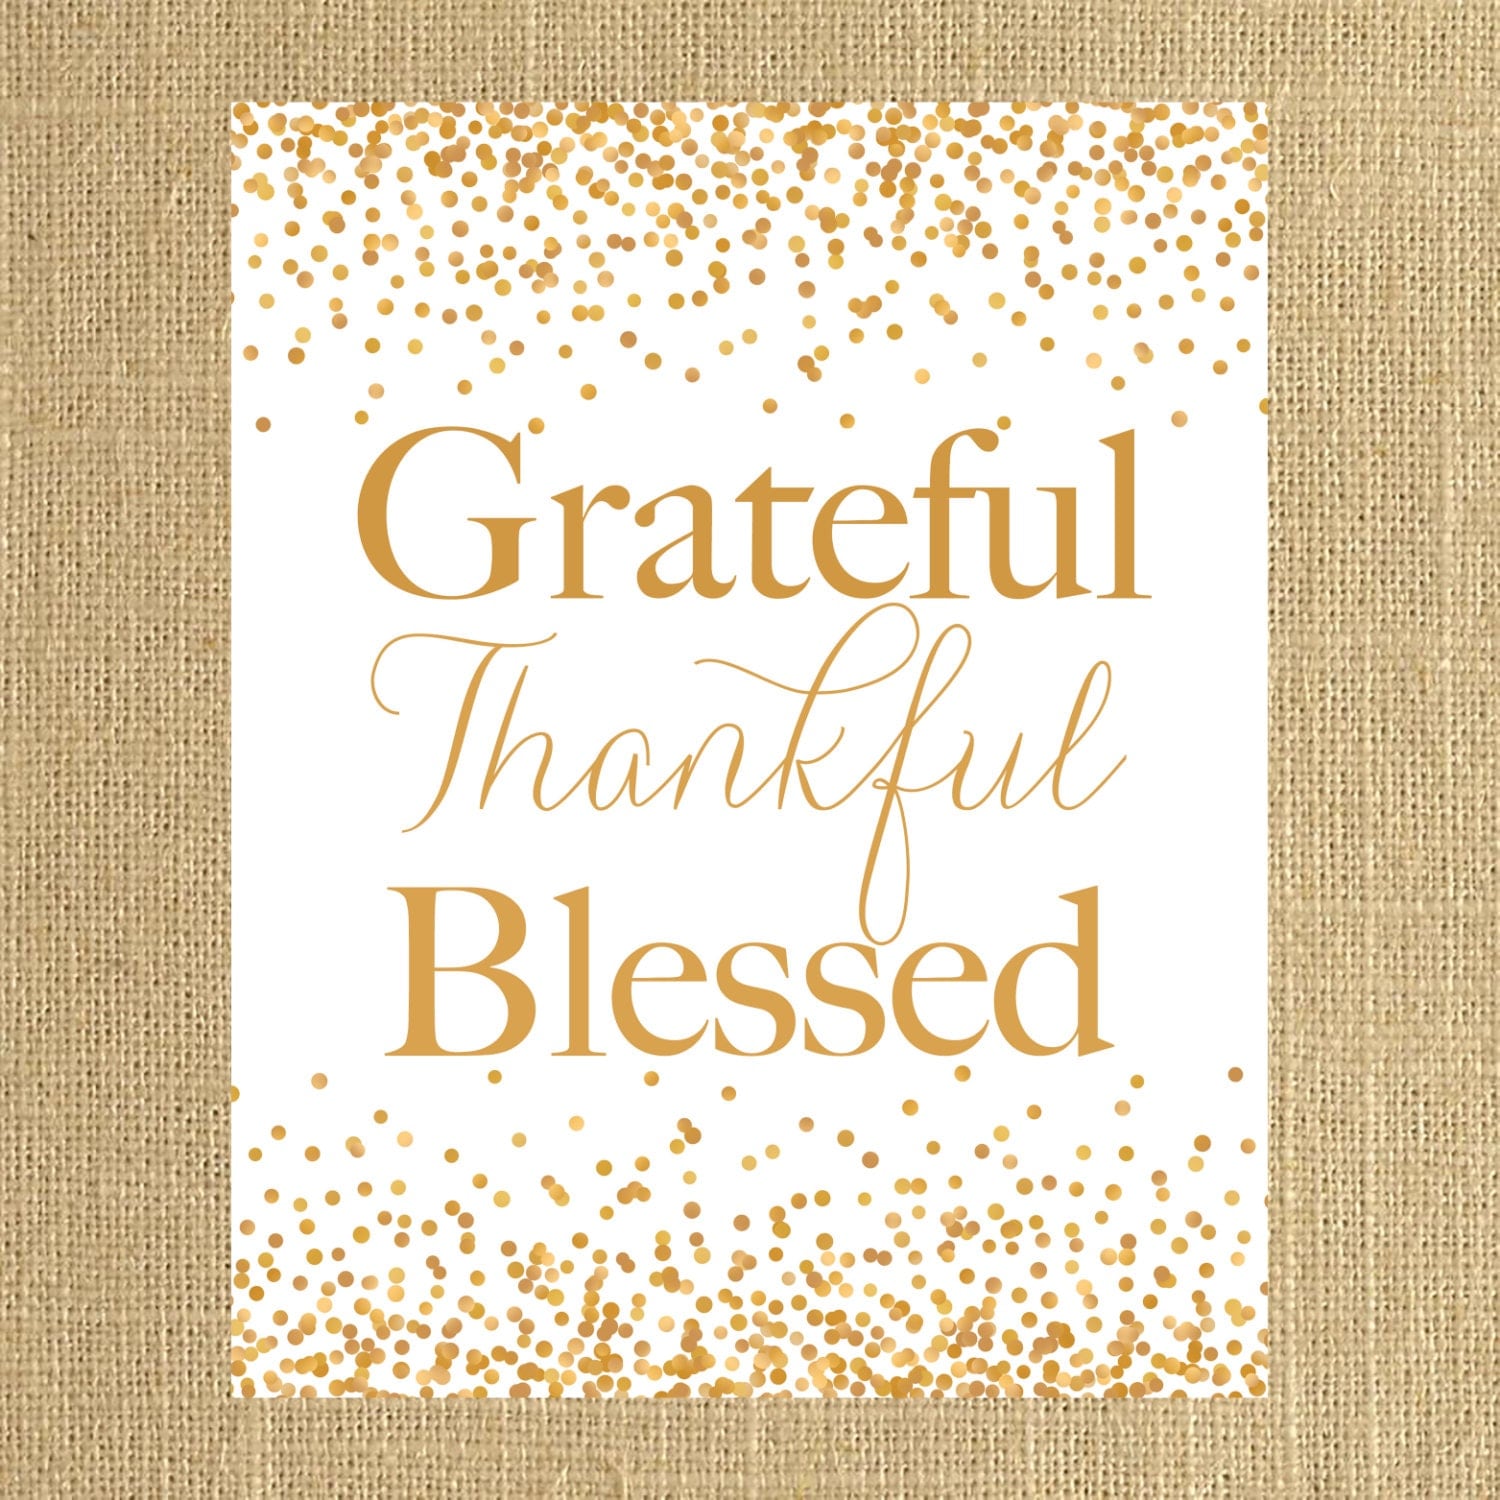 grateful-thankful-blessed-printable-by-prettycollected-on-etsy